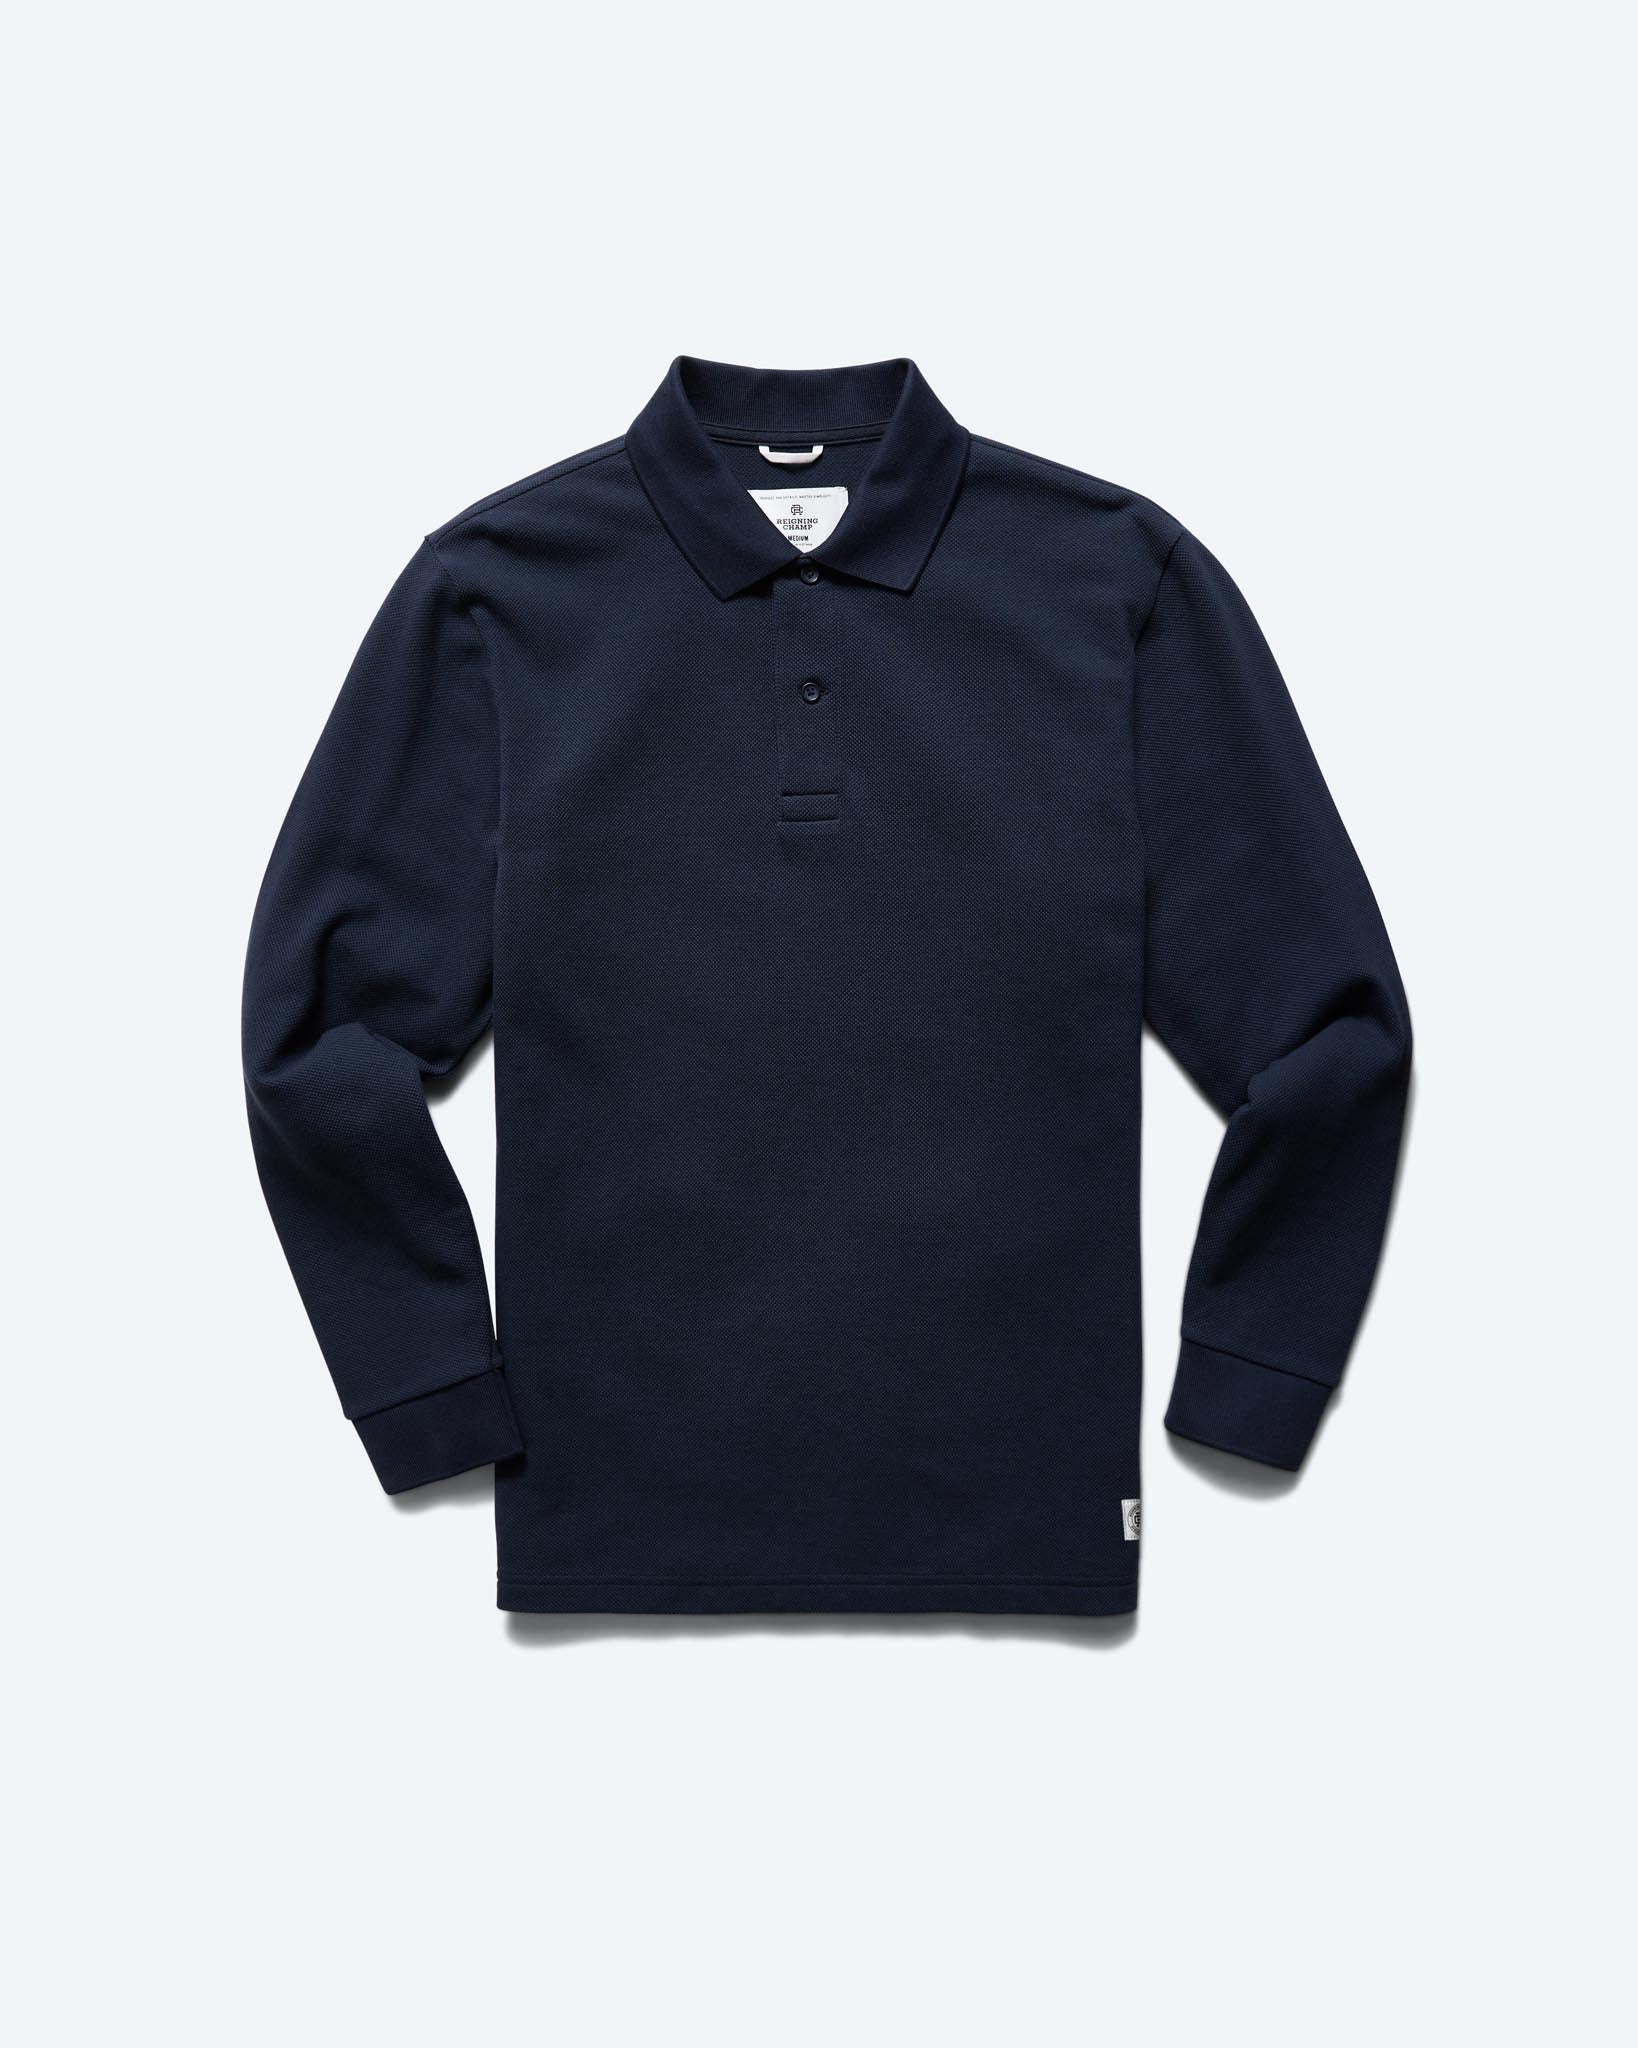 Reigning Champ Athletic Pique Academy LS Polo in Navy